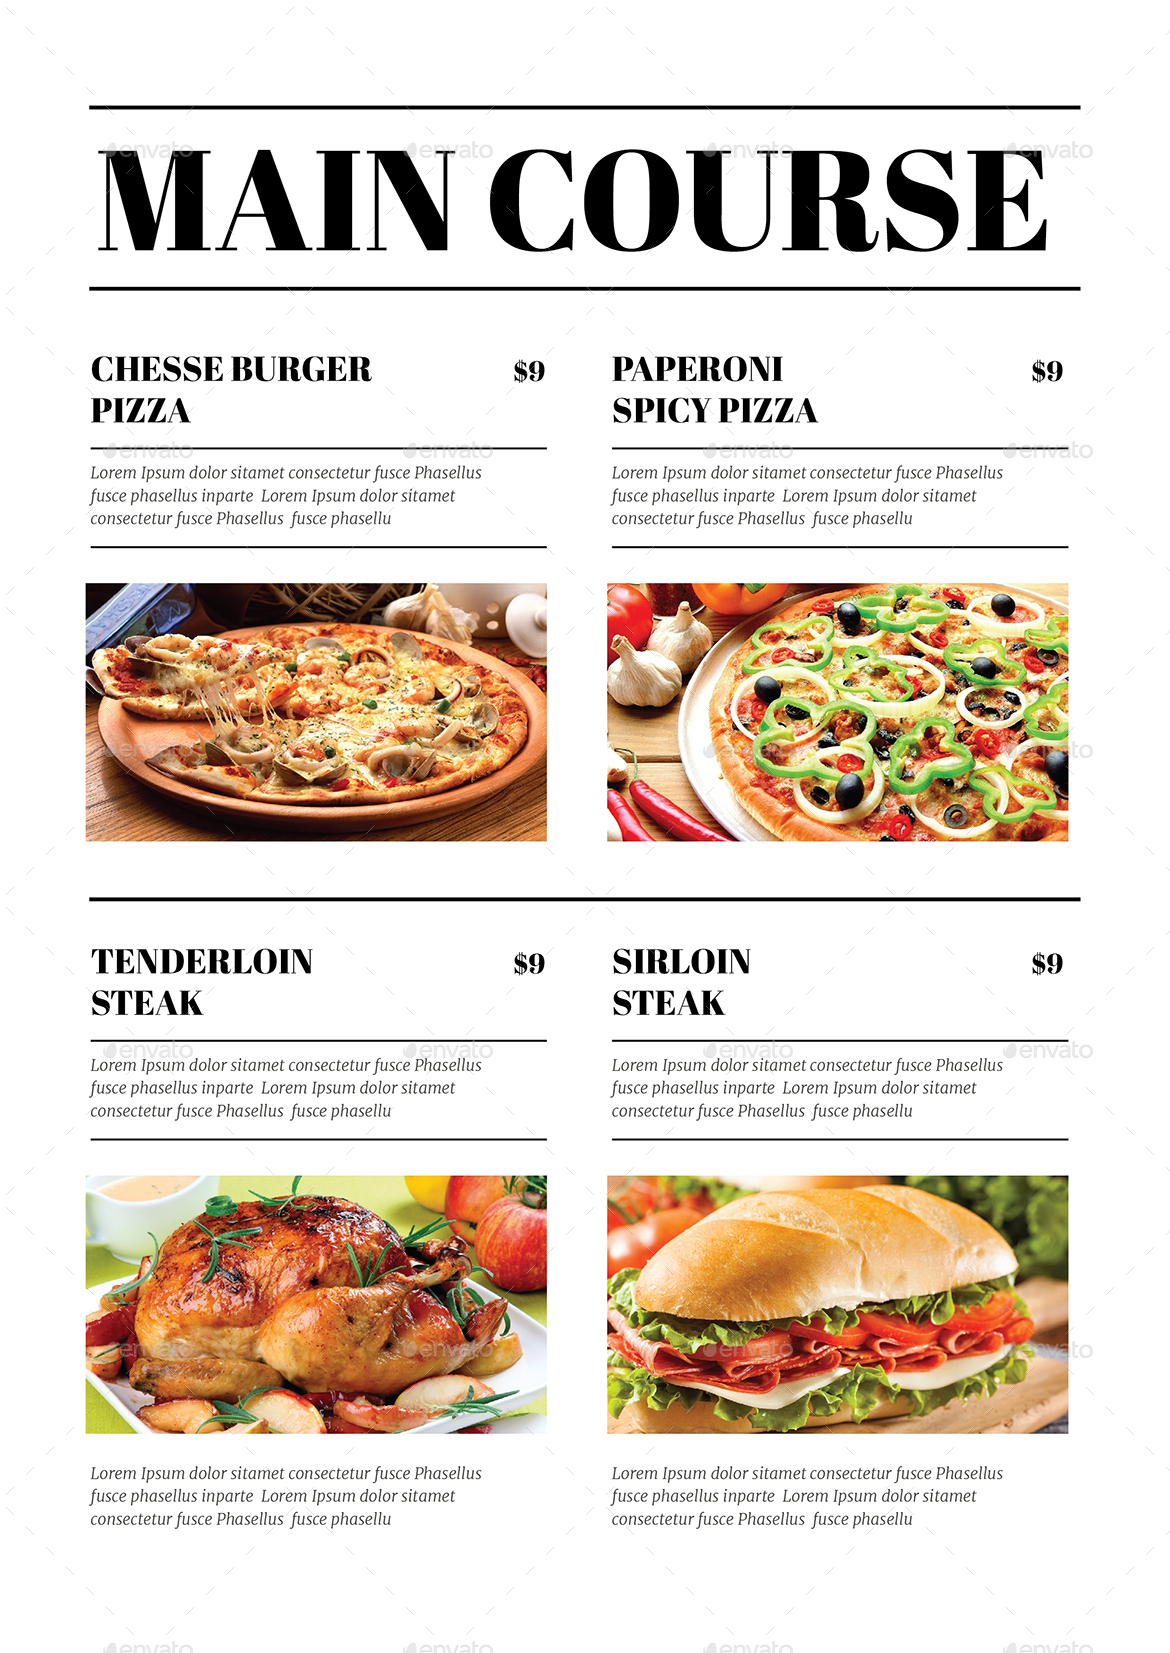 Newspaper Style Food Menus by guper | GraphicRiver